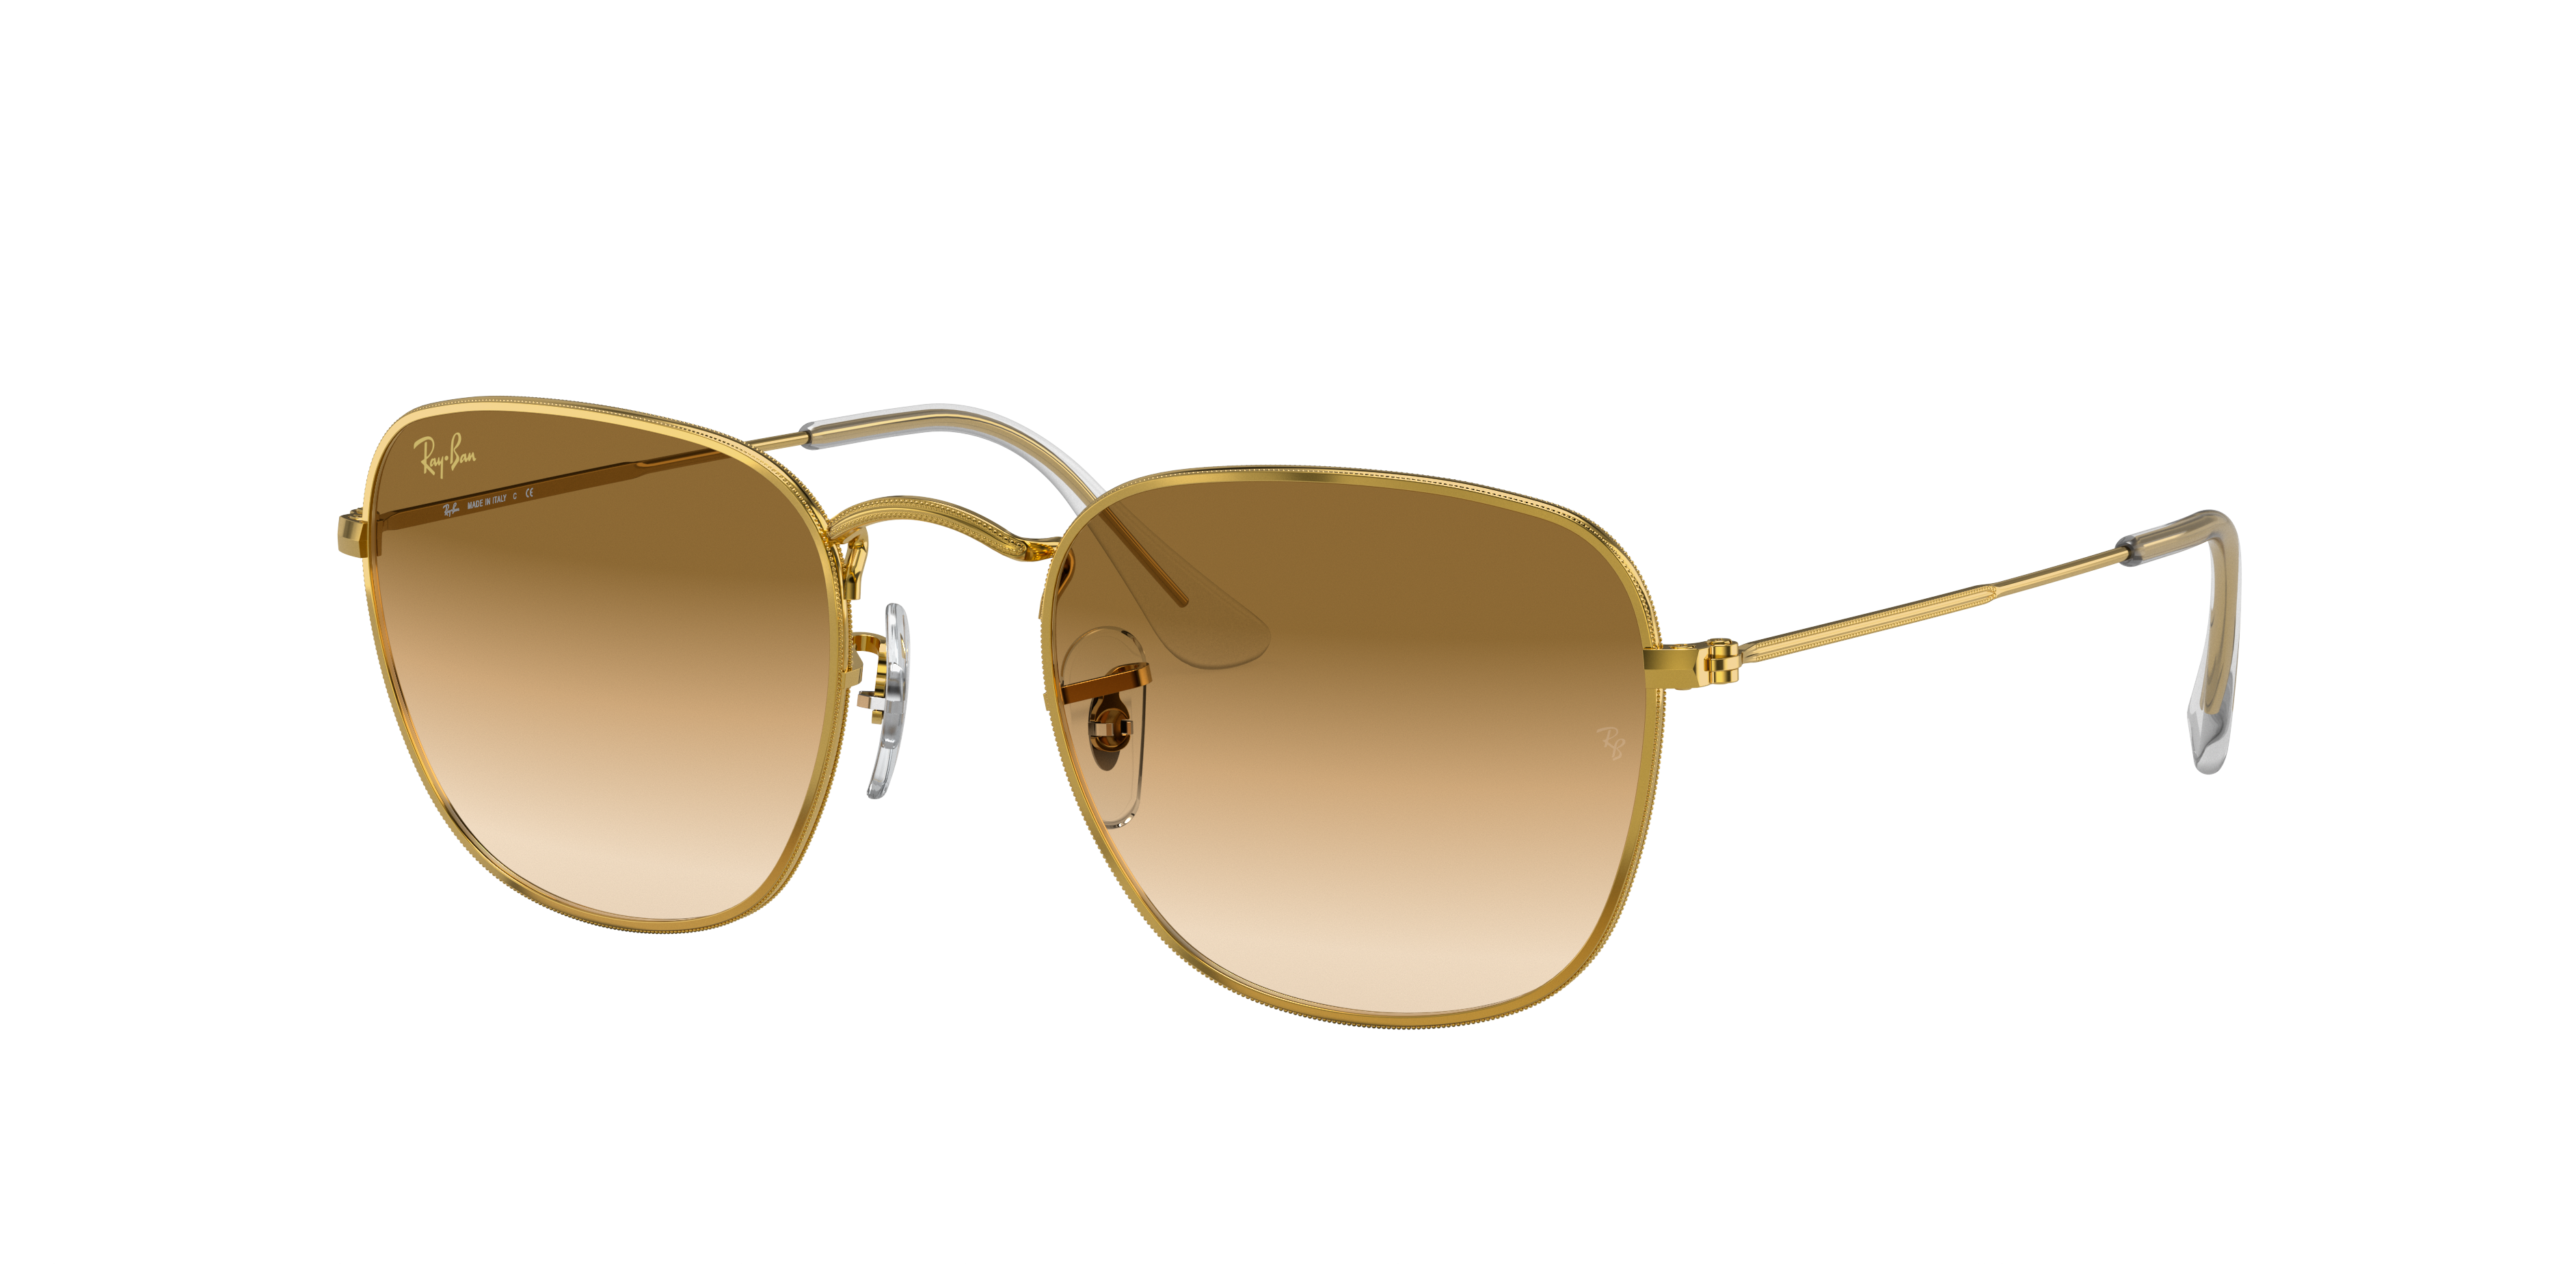 Frank Legend Gold Sunglasses in Gold and Light Ray-Ban®